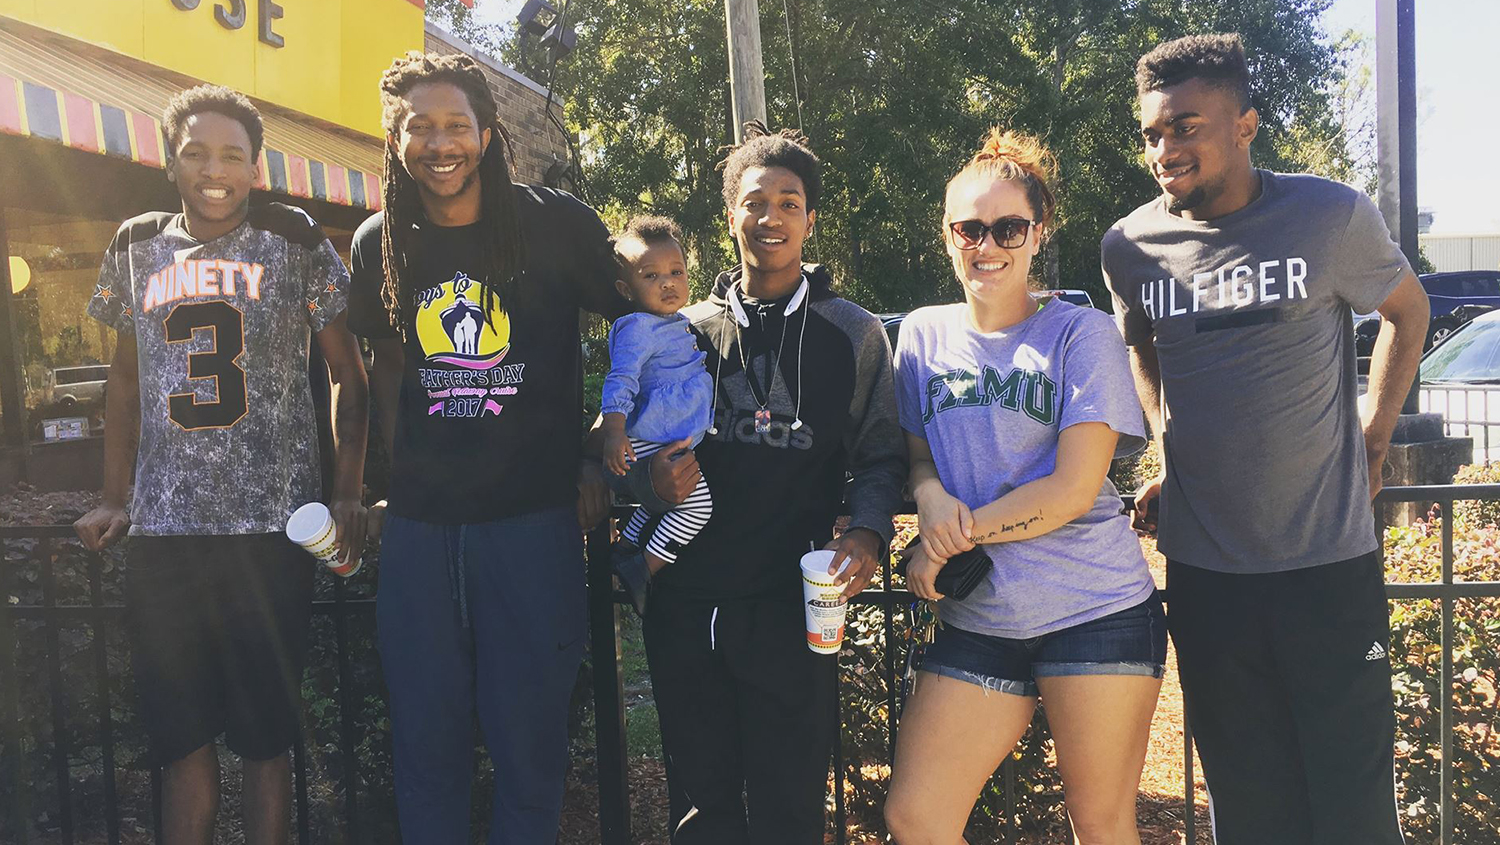 Kendra Dowen is pictured with four students. One student is holding a child.